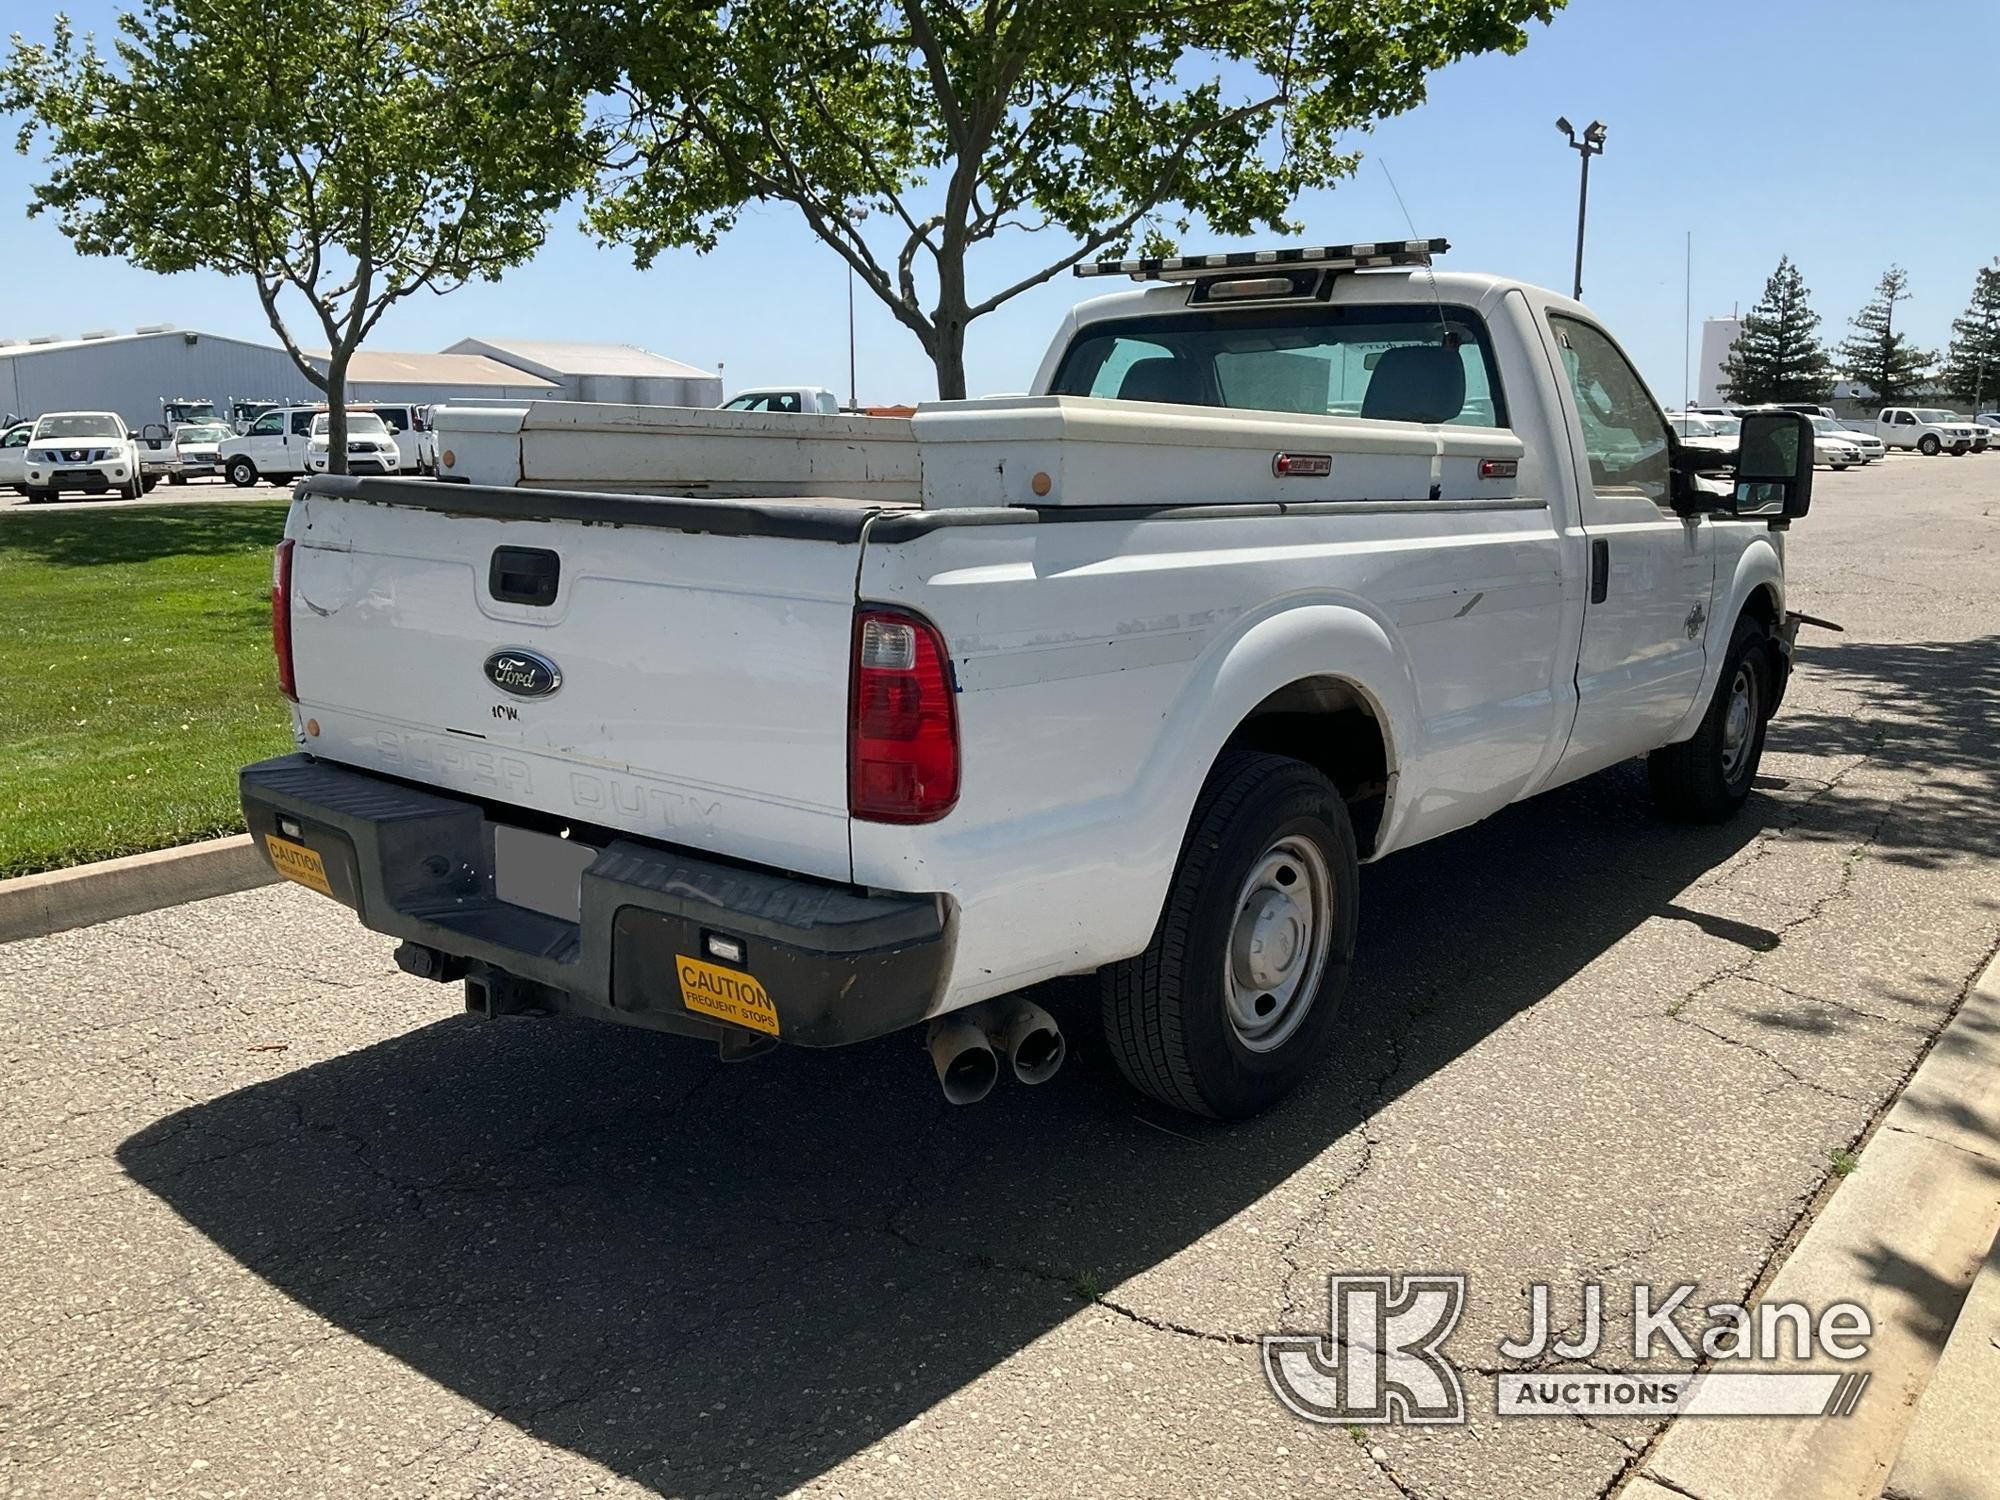 (Dixon, CA) 2013 Ford F250 Pickup Truck, DEF System Runs & Moves) (Front End Damage